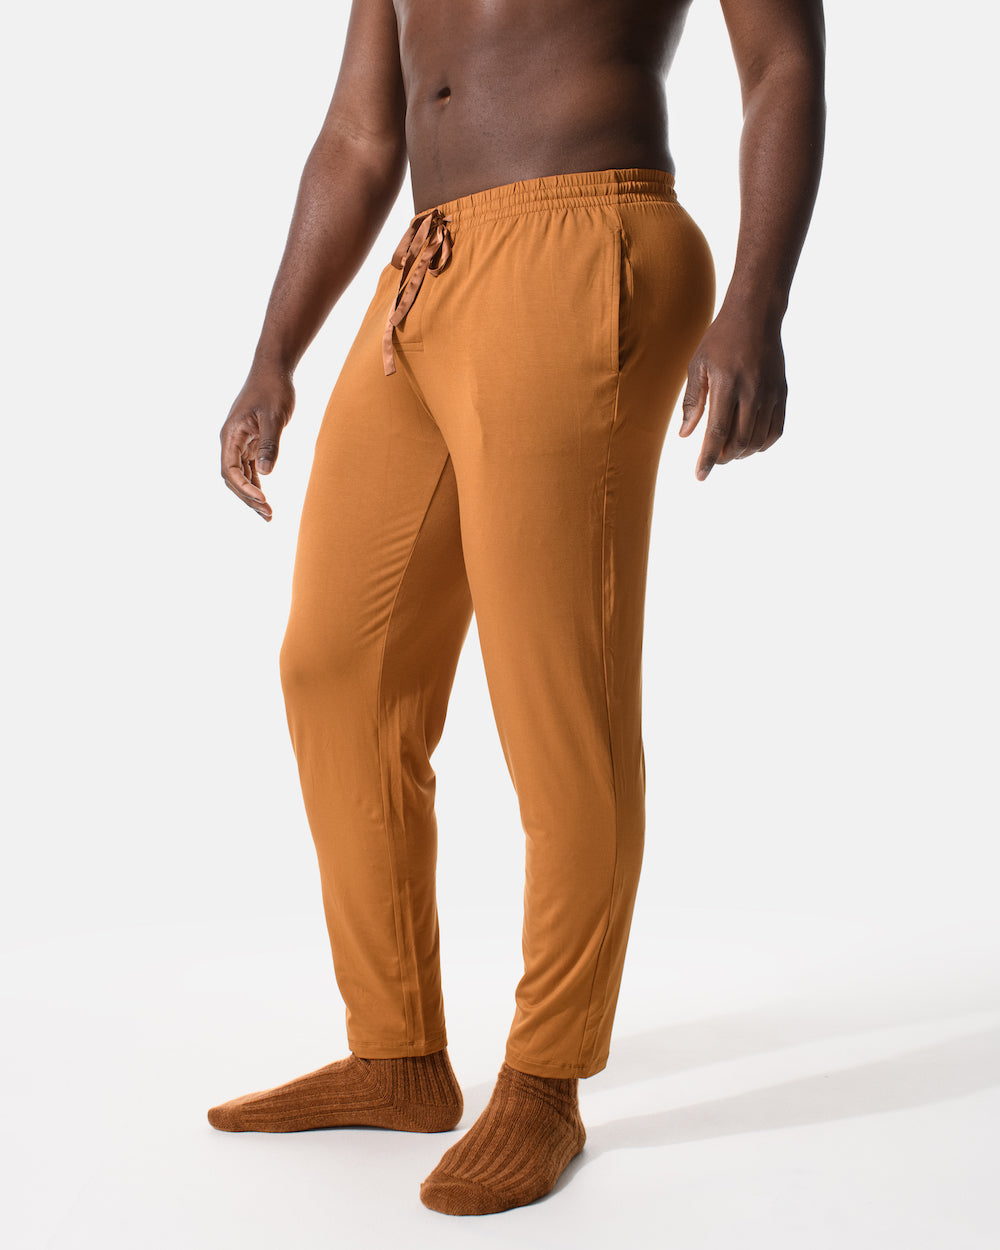 Go Hard and Go Home Swoop Back Lounge Pants - Nineteen-86 Boutique